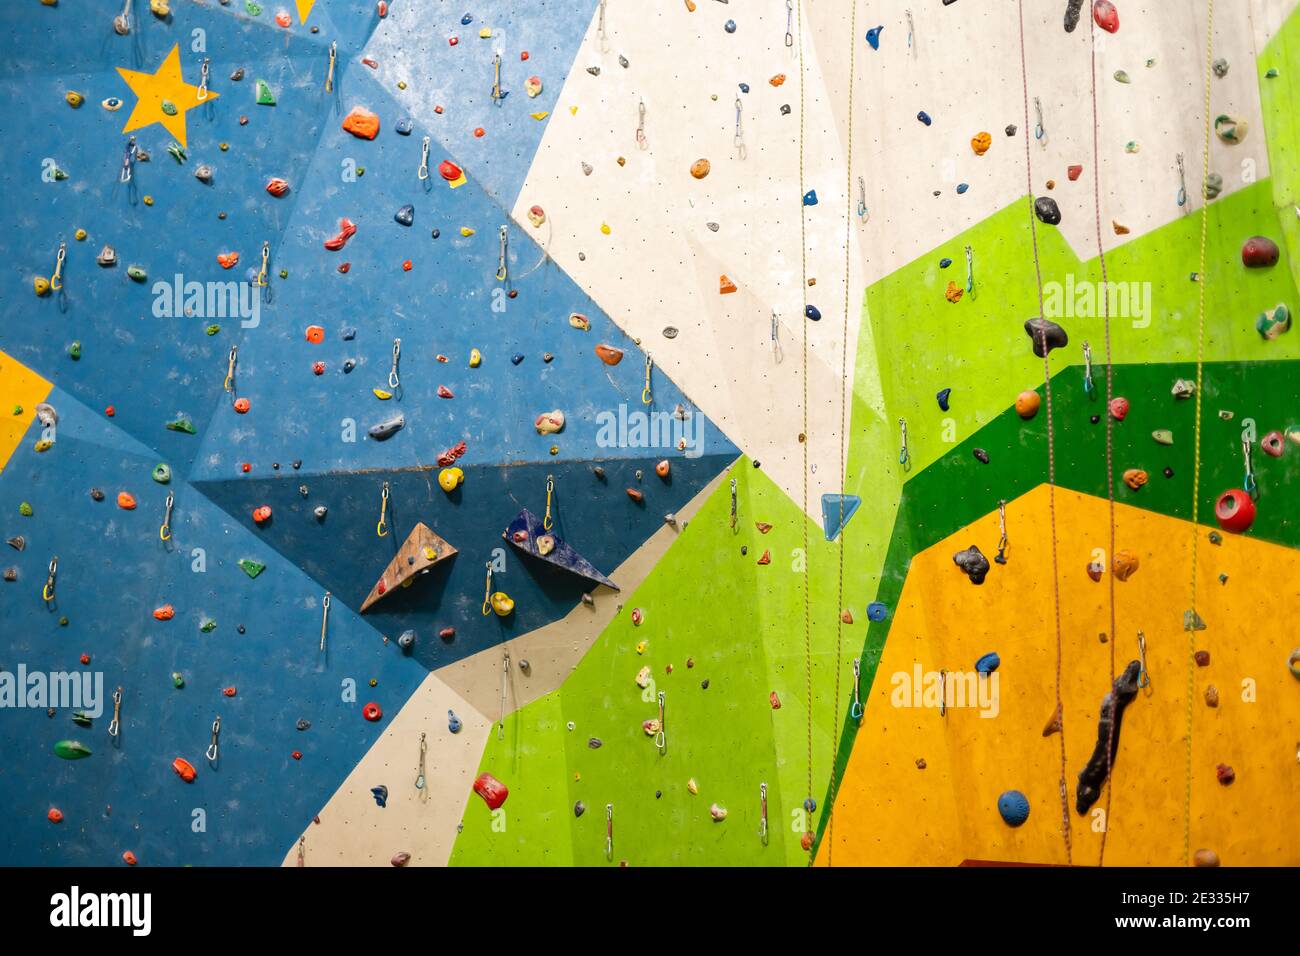 A rock climbing wall for background Stock Photo - Alamy